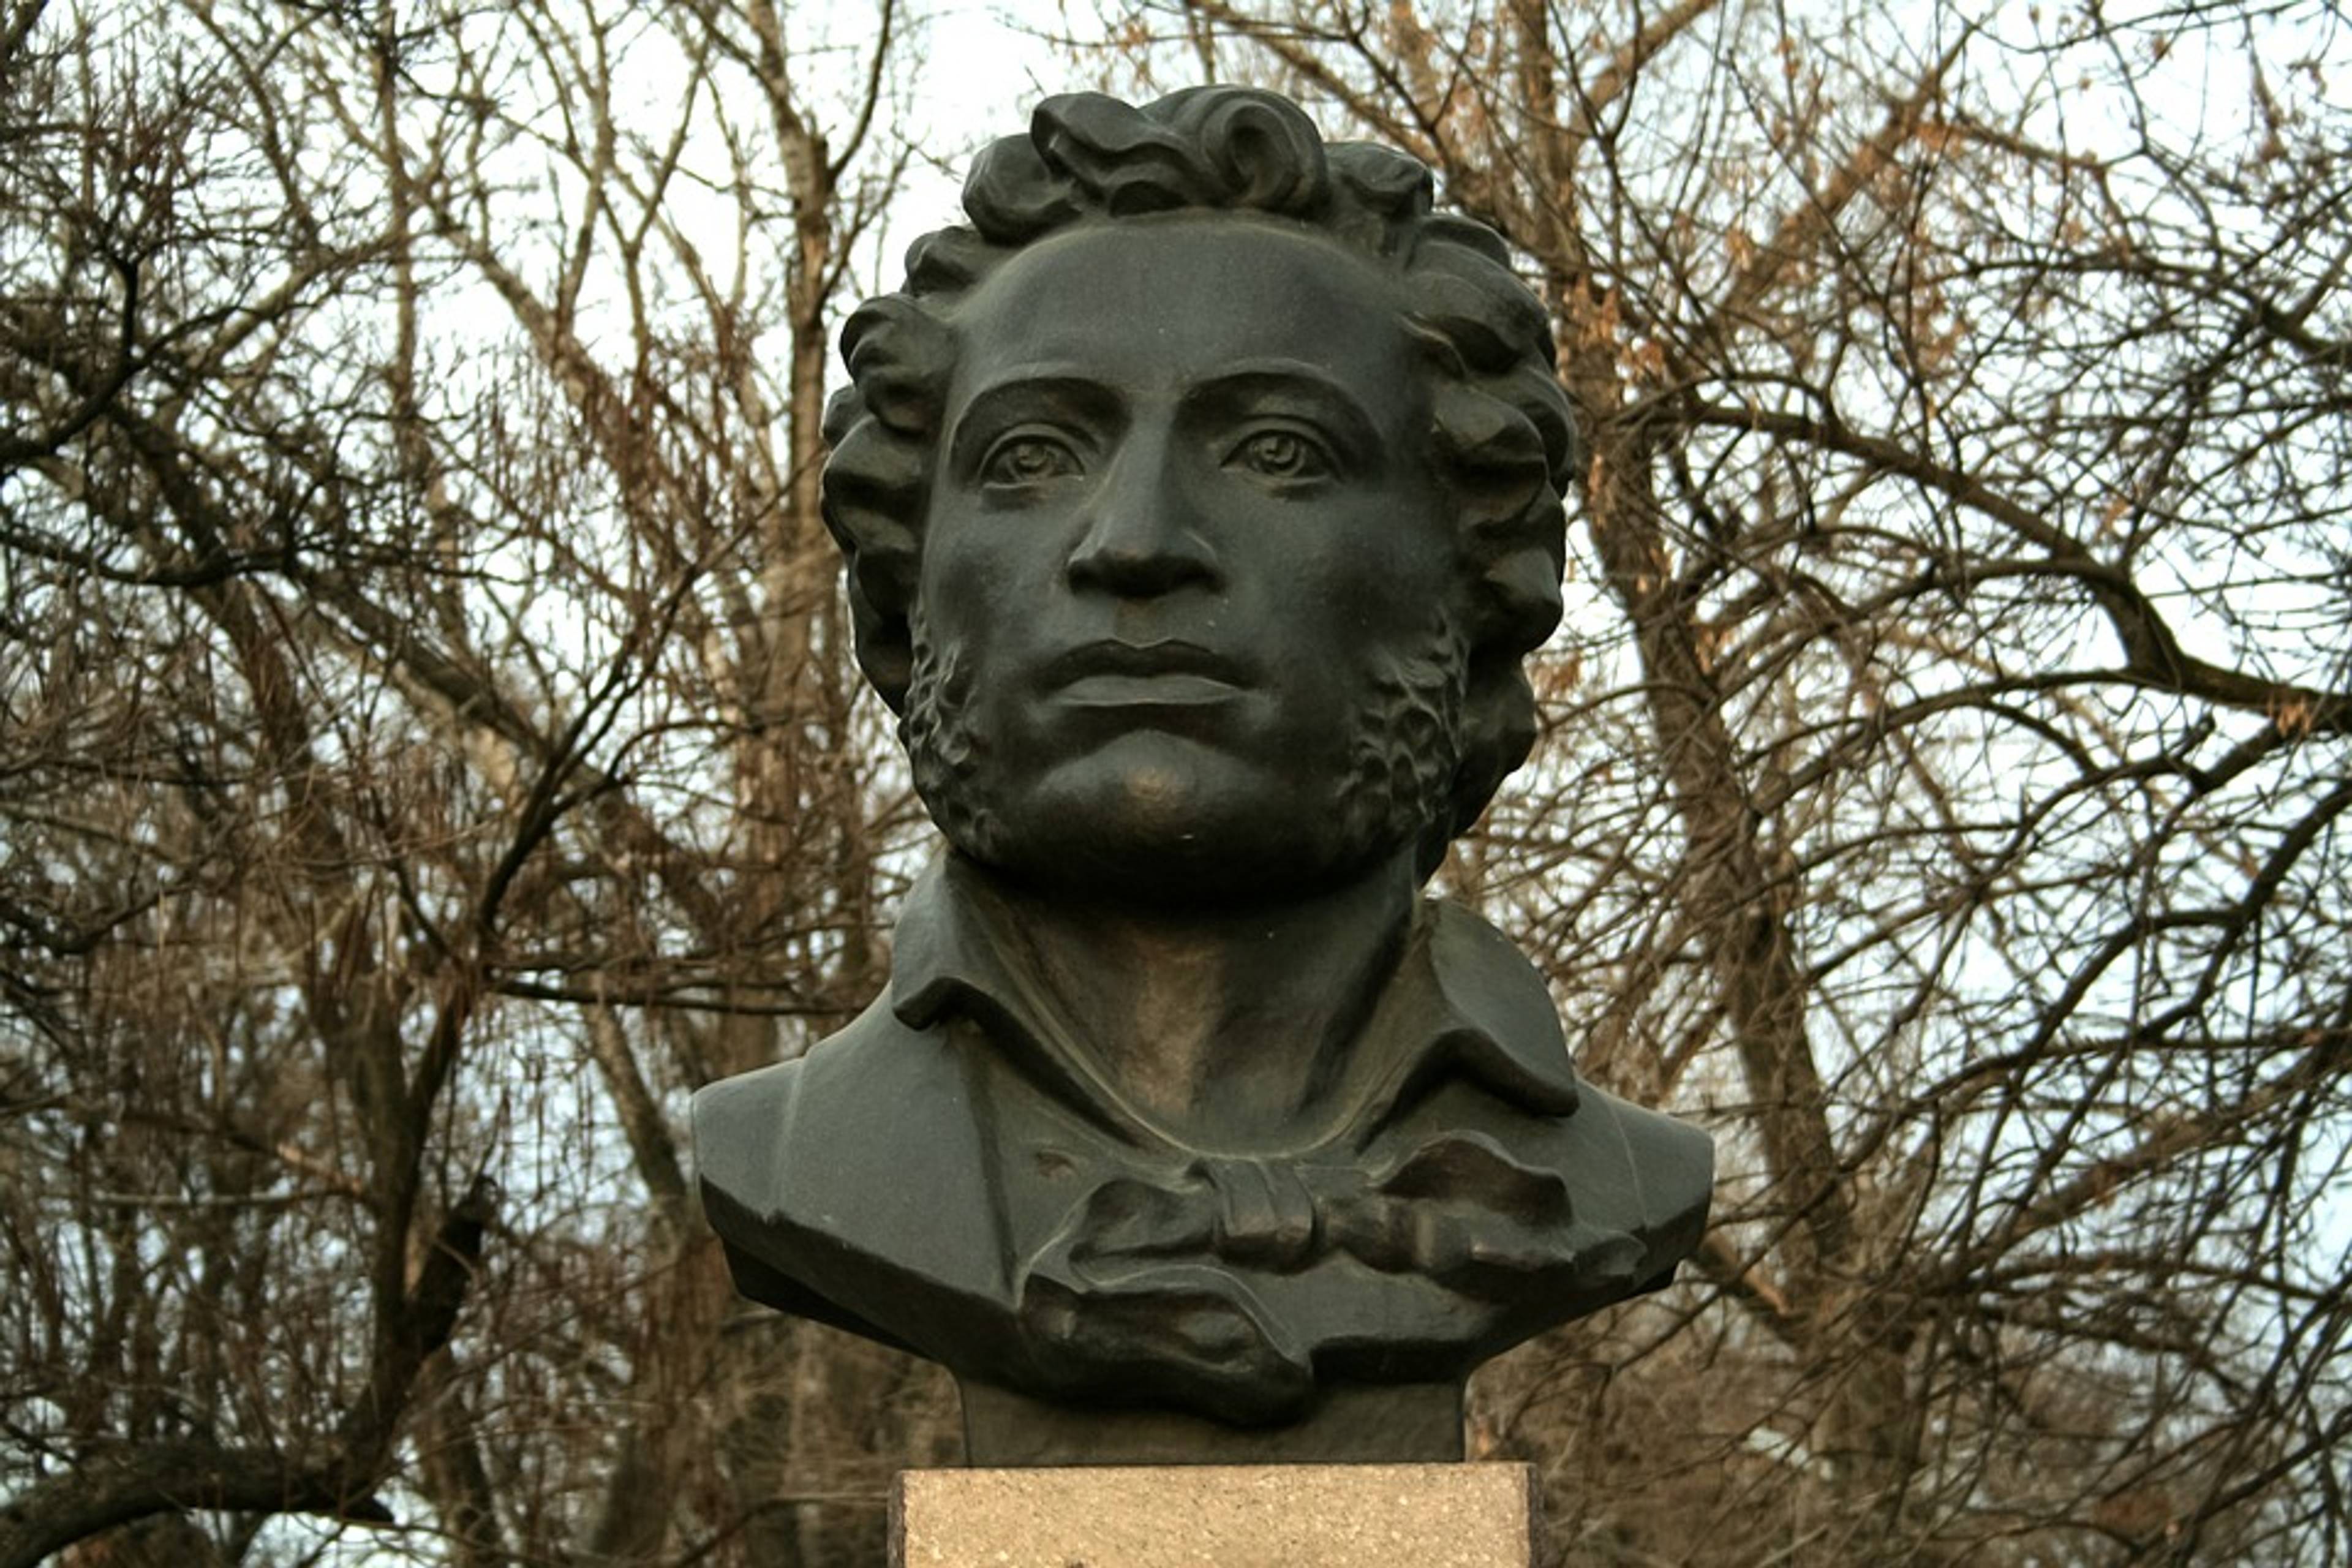 Moments from the life of Alexander Pushkin